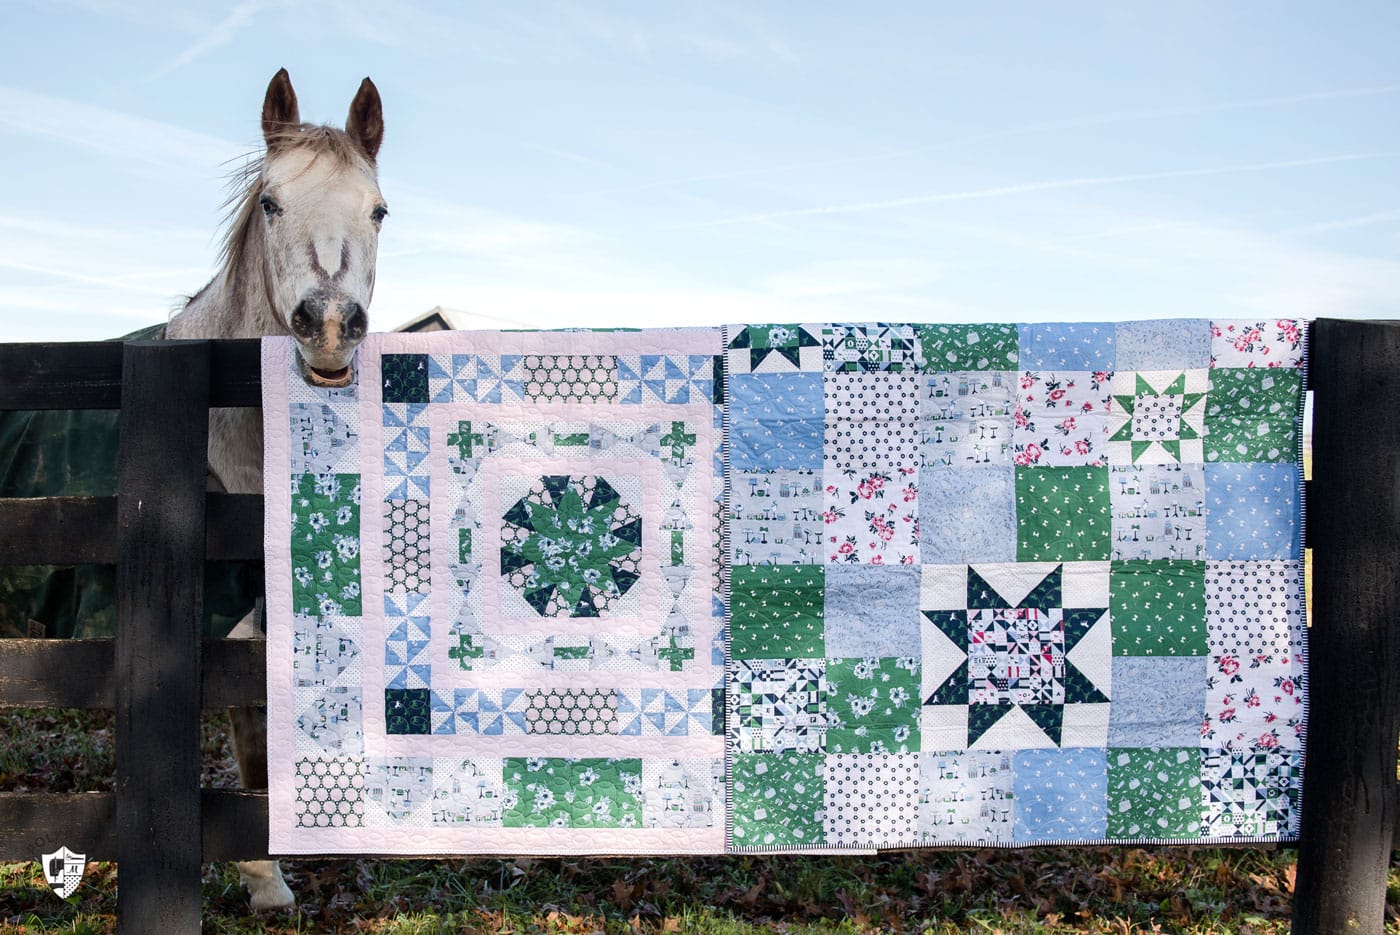 Free pattern for a Simple Sawtooth Star Baby Quilt - so fast to stitch up - great for a beginning quilter! #quilts #babyquilt #beginningquilter #quilttutorial